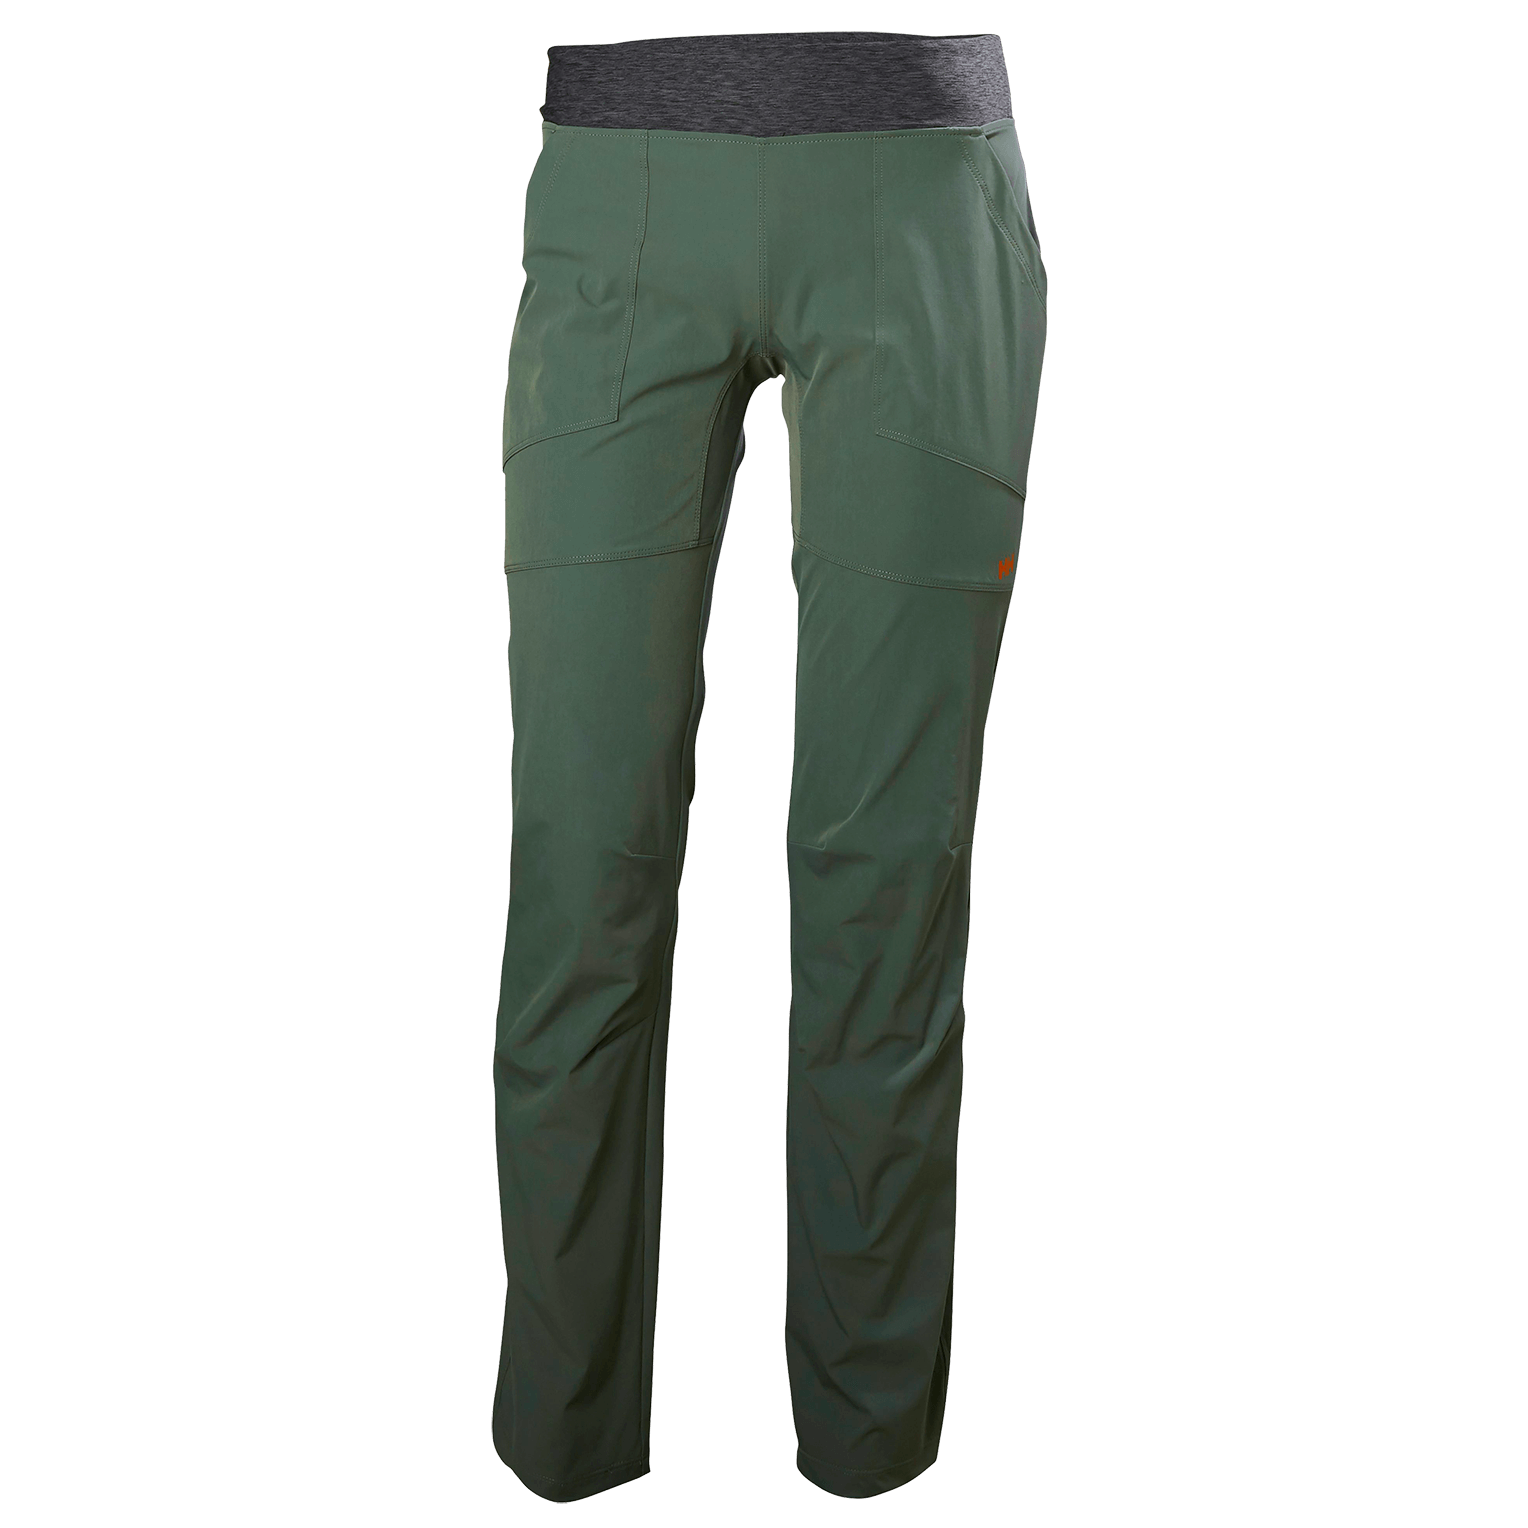 Trousers Png Hd Hdpng.com 1528 - Trousers, Transparent background PNG HD thumbnail